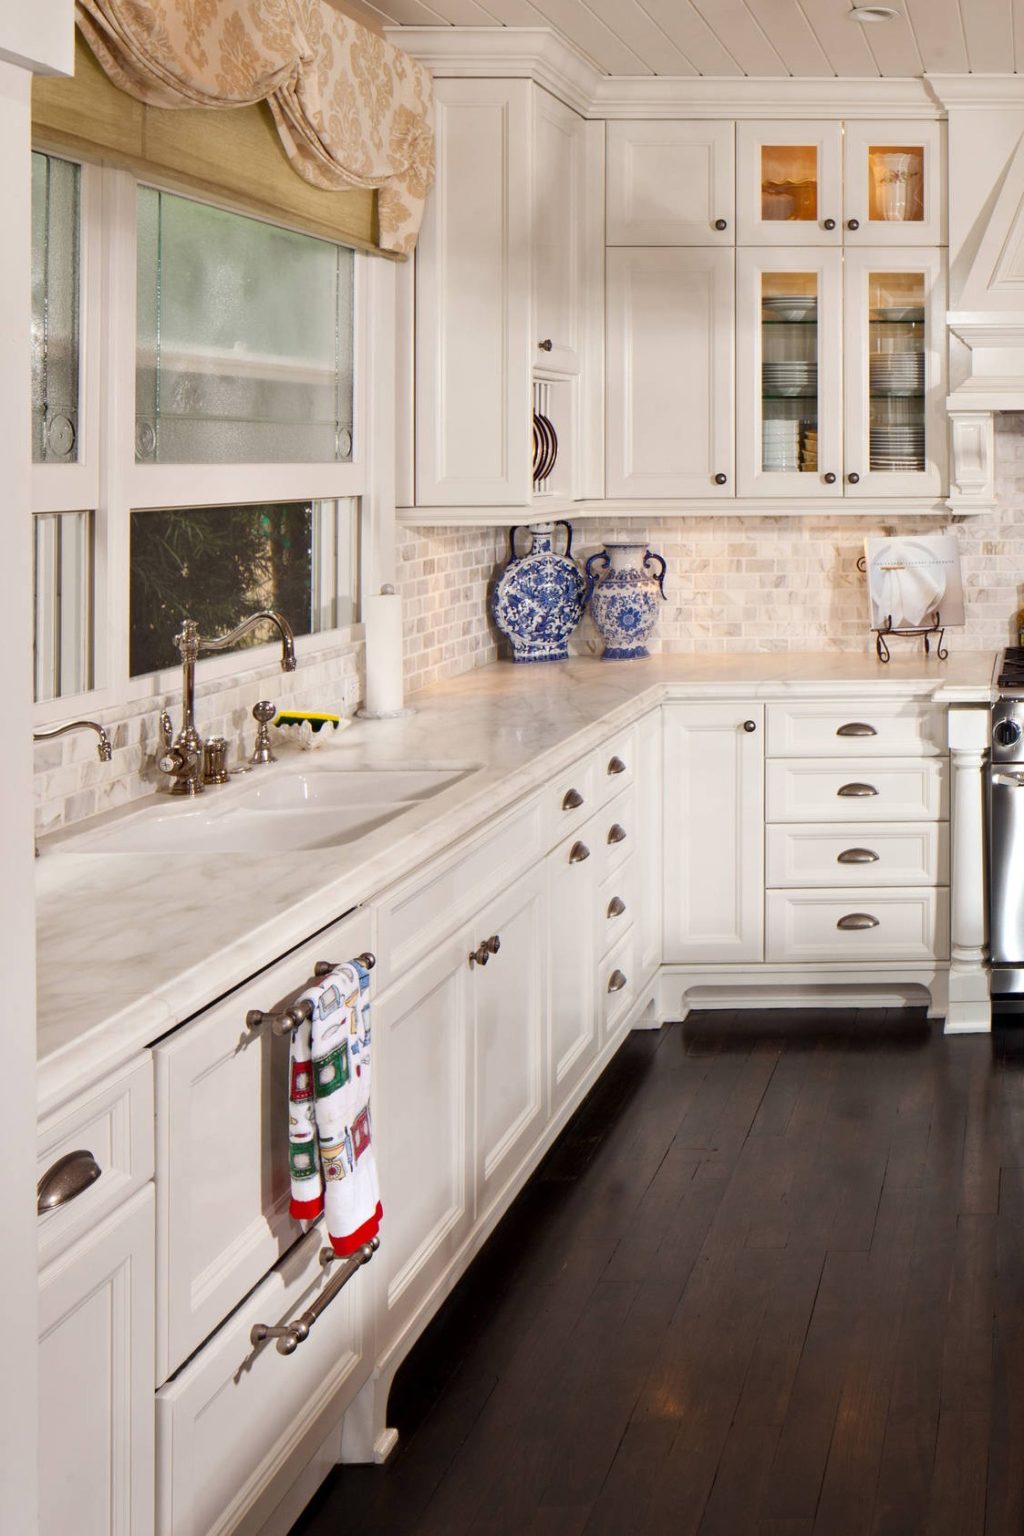 48 + Backsplash Ideas For White Countertops and White Cabinets